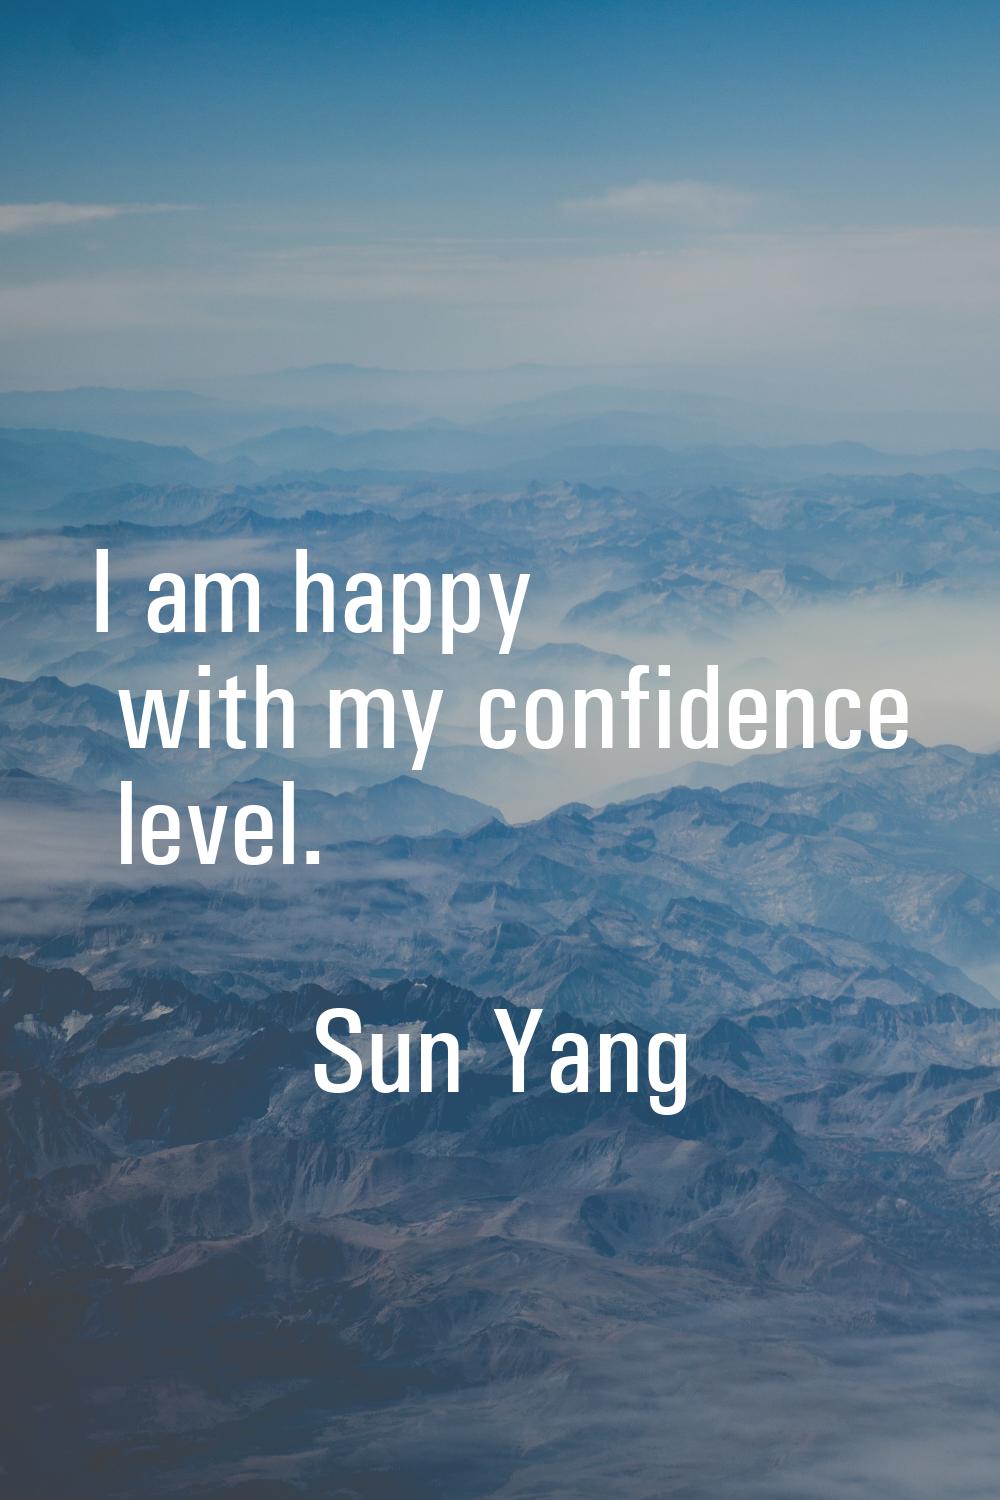 I am happy with my confidence level.